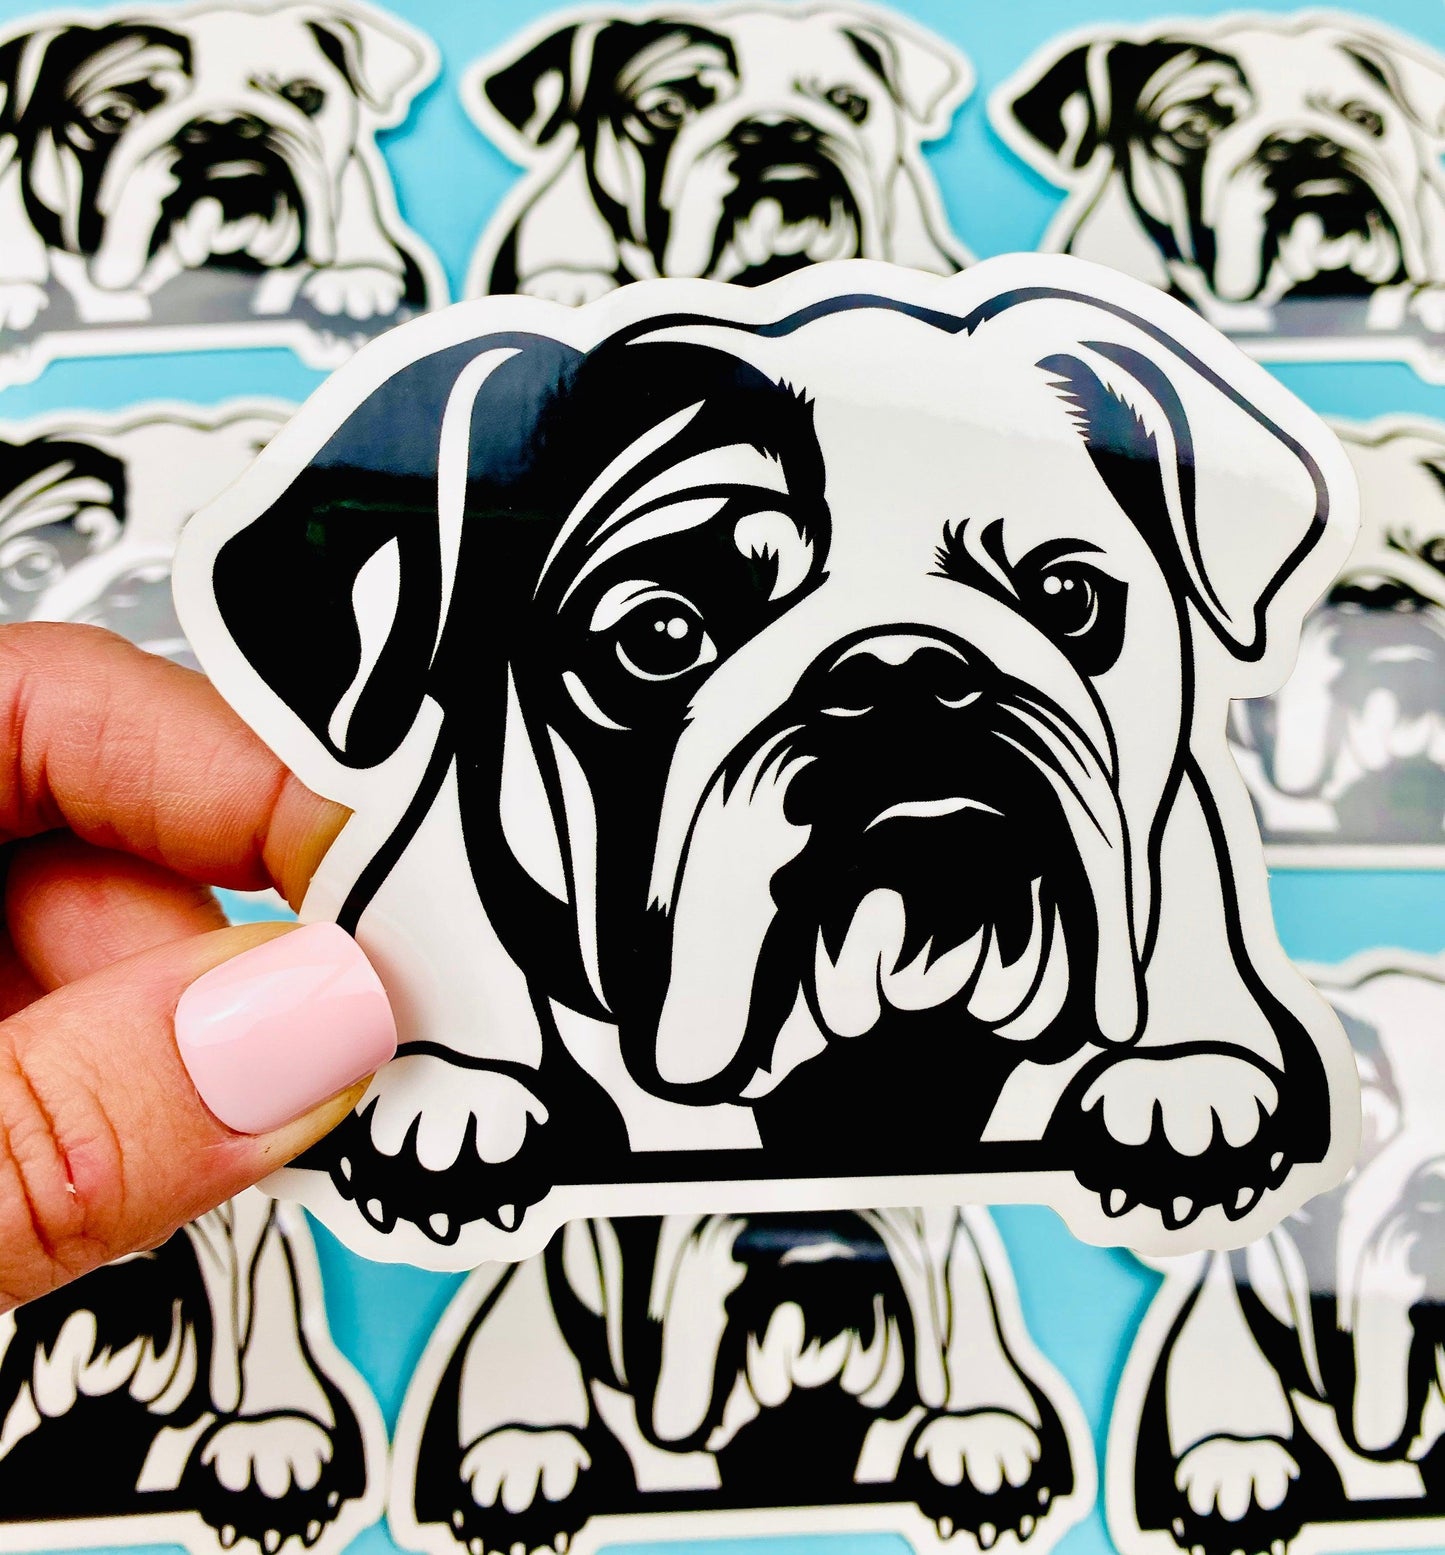 English Bulldog Sticker Black & White English Bulldog Head Paws Dog Decal for Car, Water Bottle - Ottos Grotto :: Stickers For Your Stuff